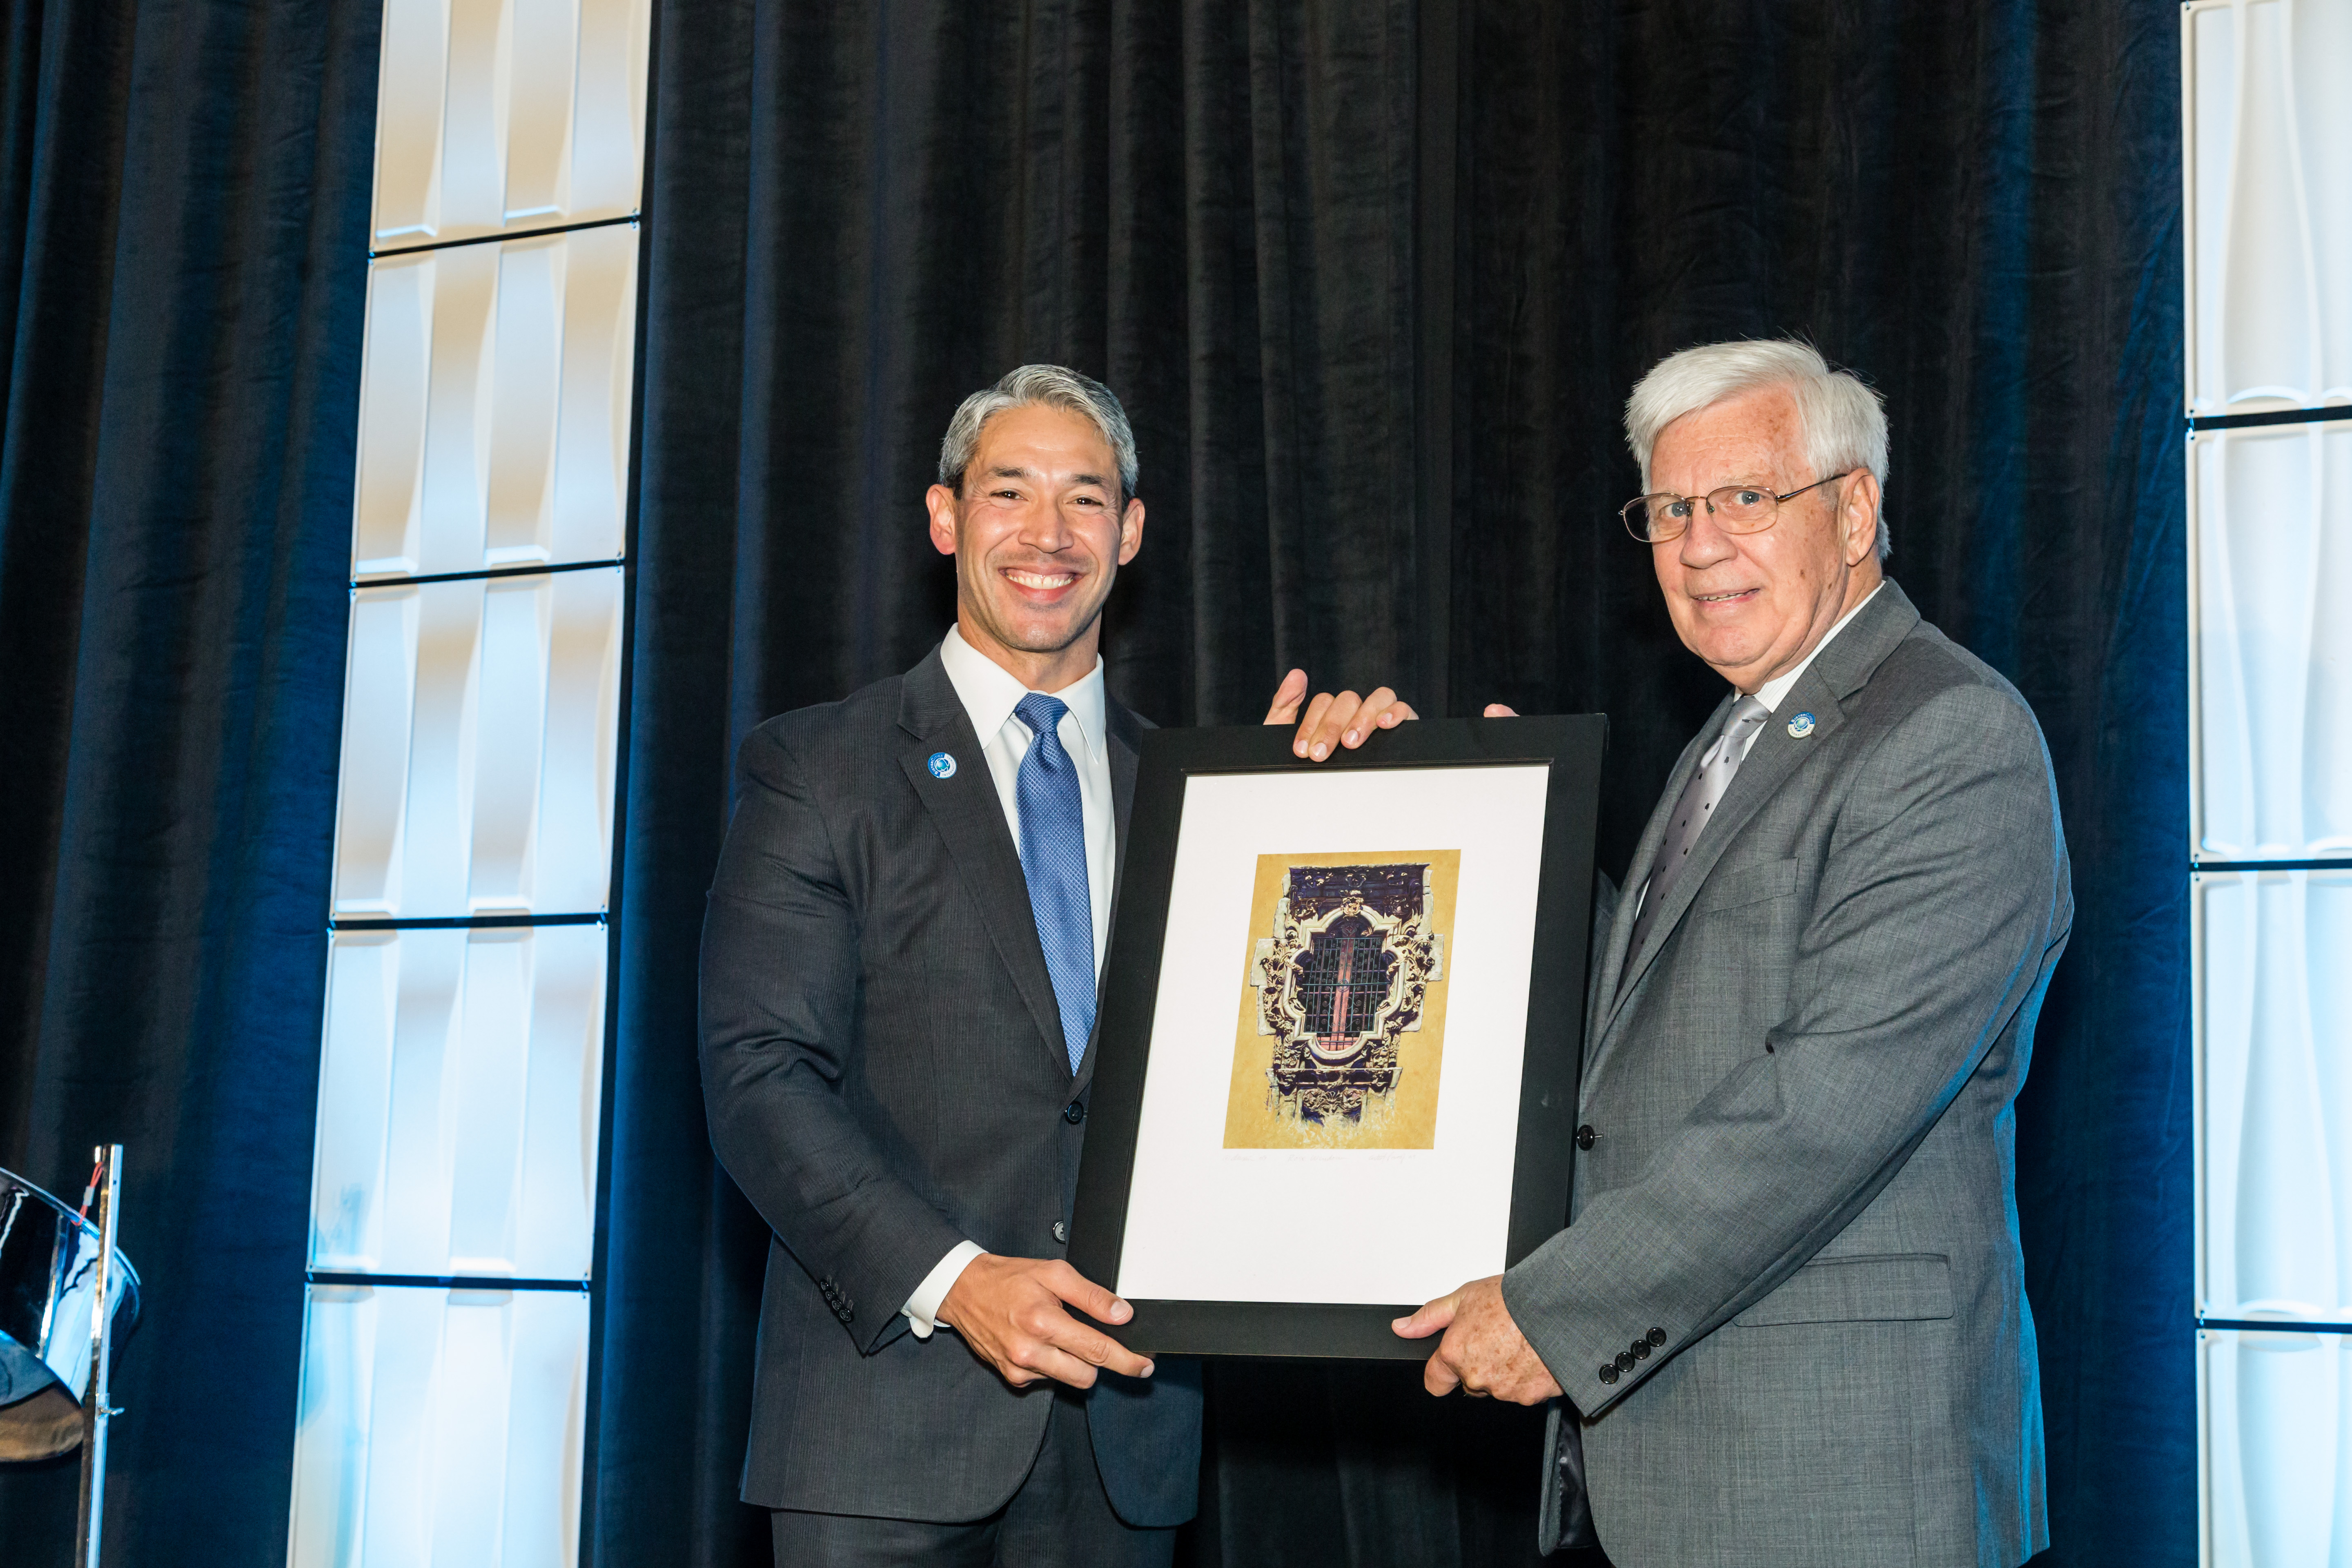 Ron Nirenberg Gives Special Gift to Tim Quigley for Service